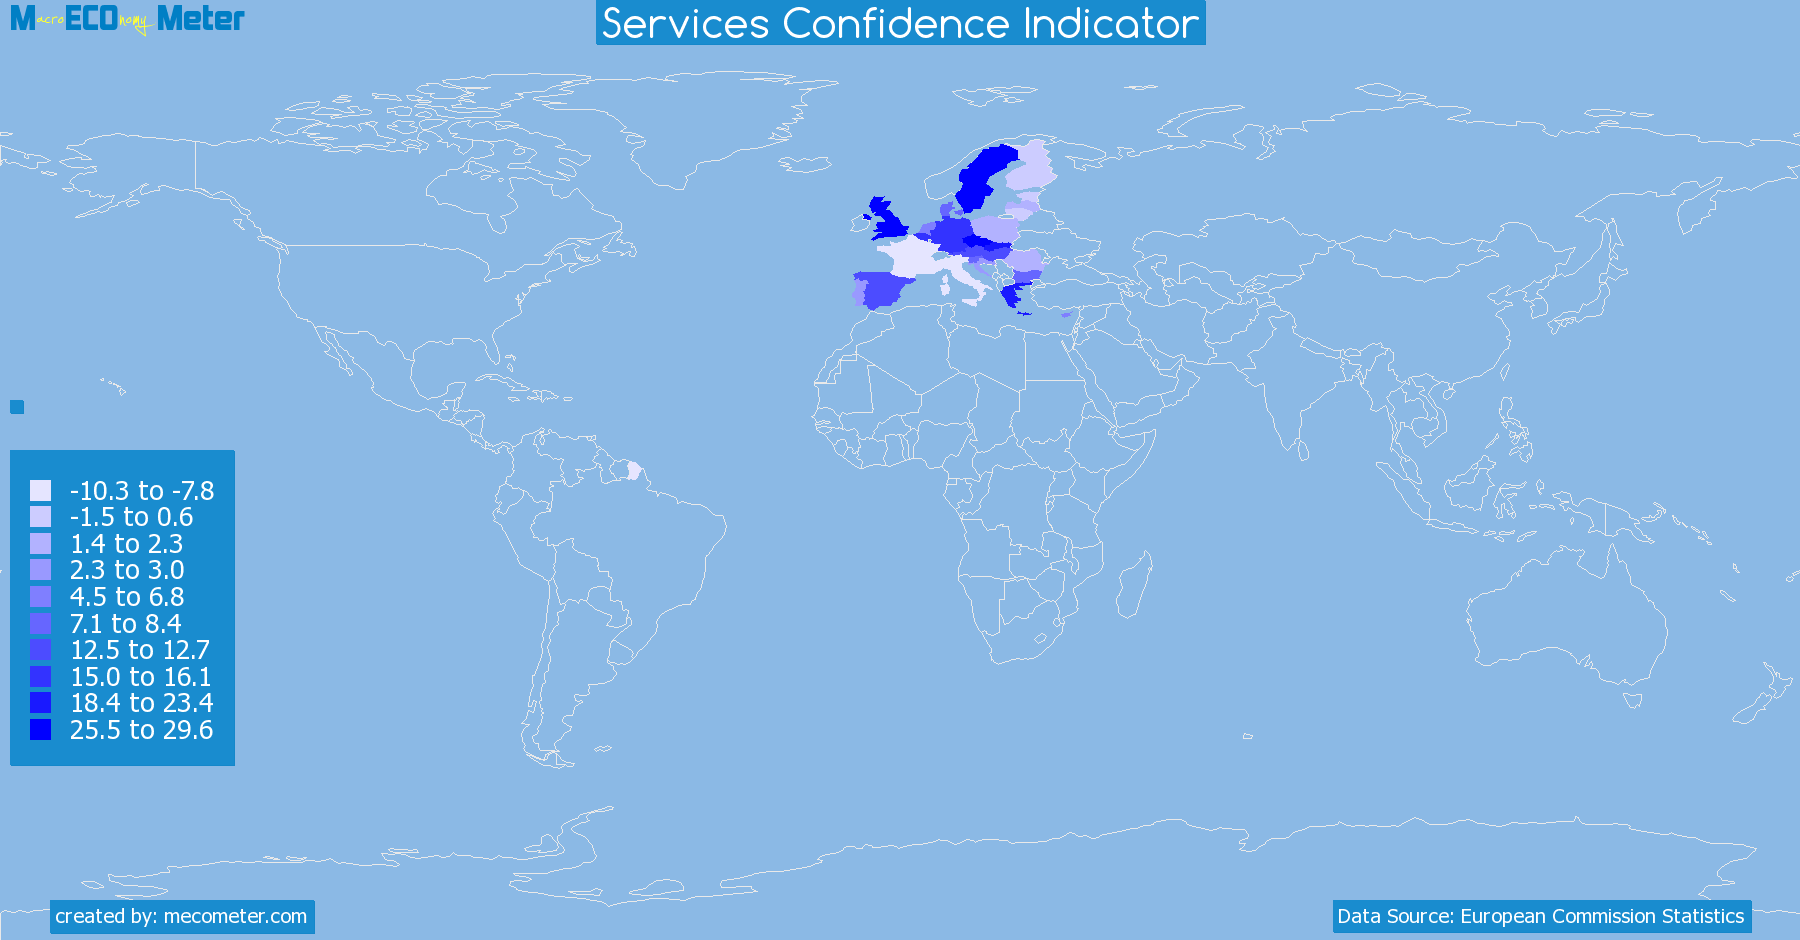 Worldmap of all countries colored to reflect the values of Services Confidence Indicator